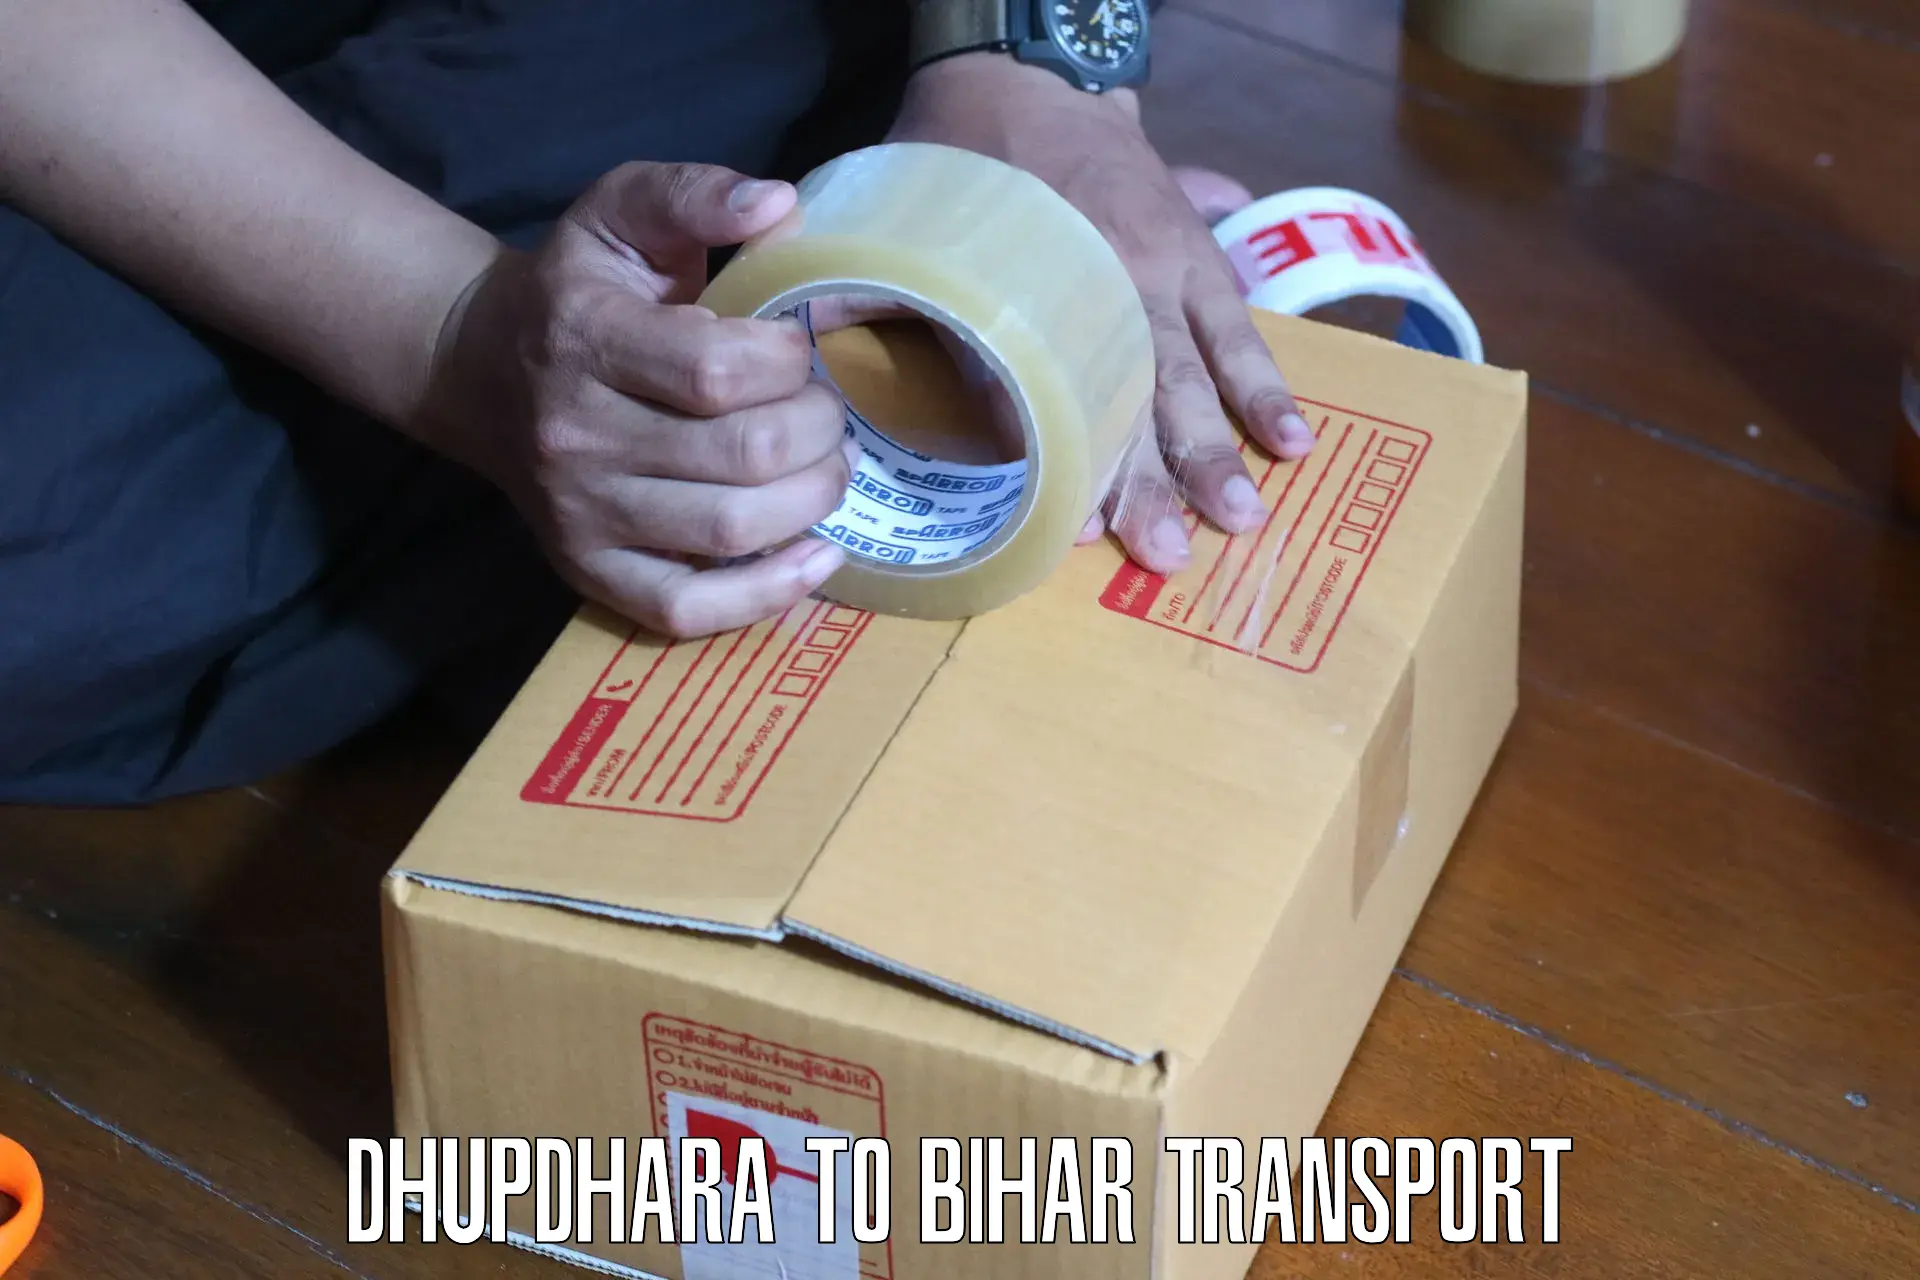 Daily parcel service transport Dhupdhara to Nuaon